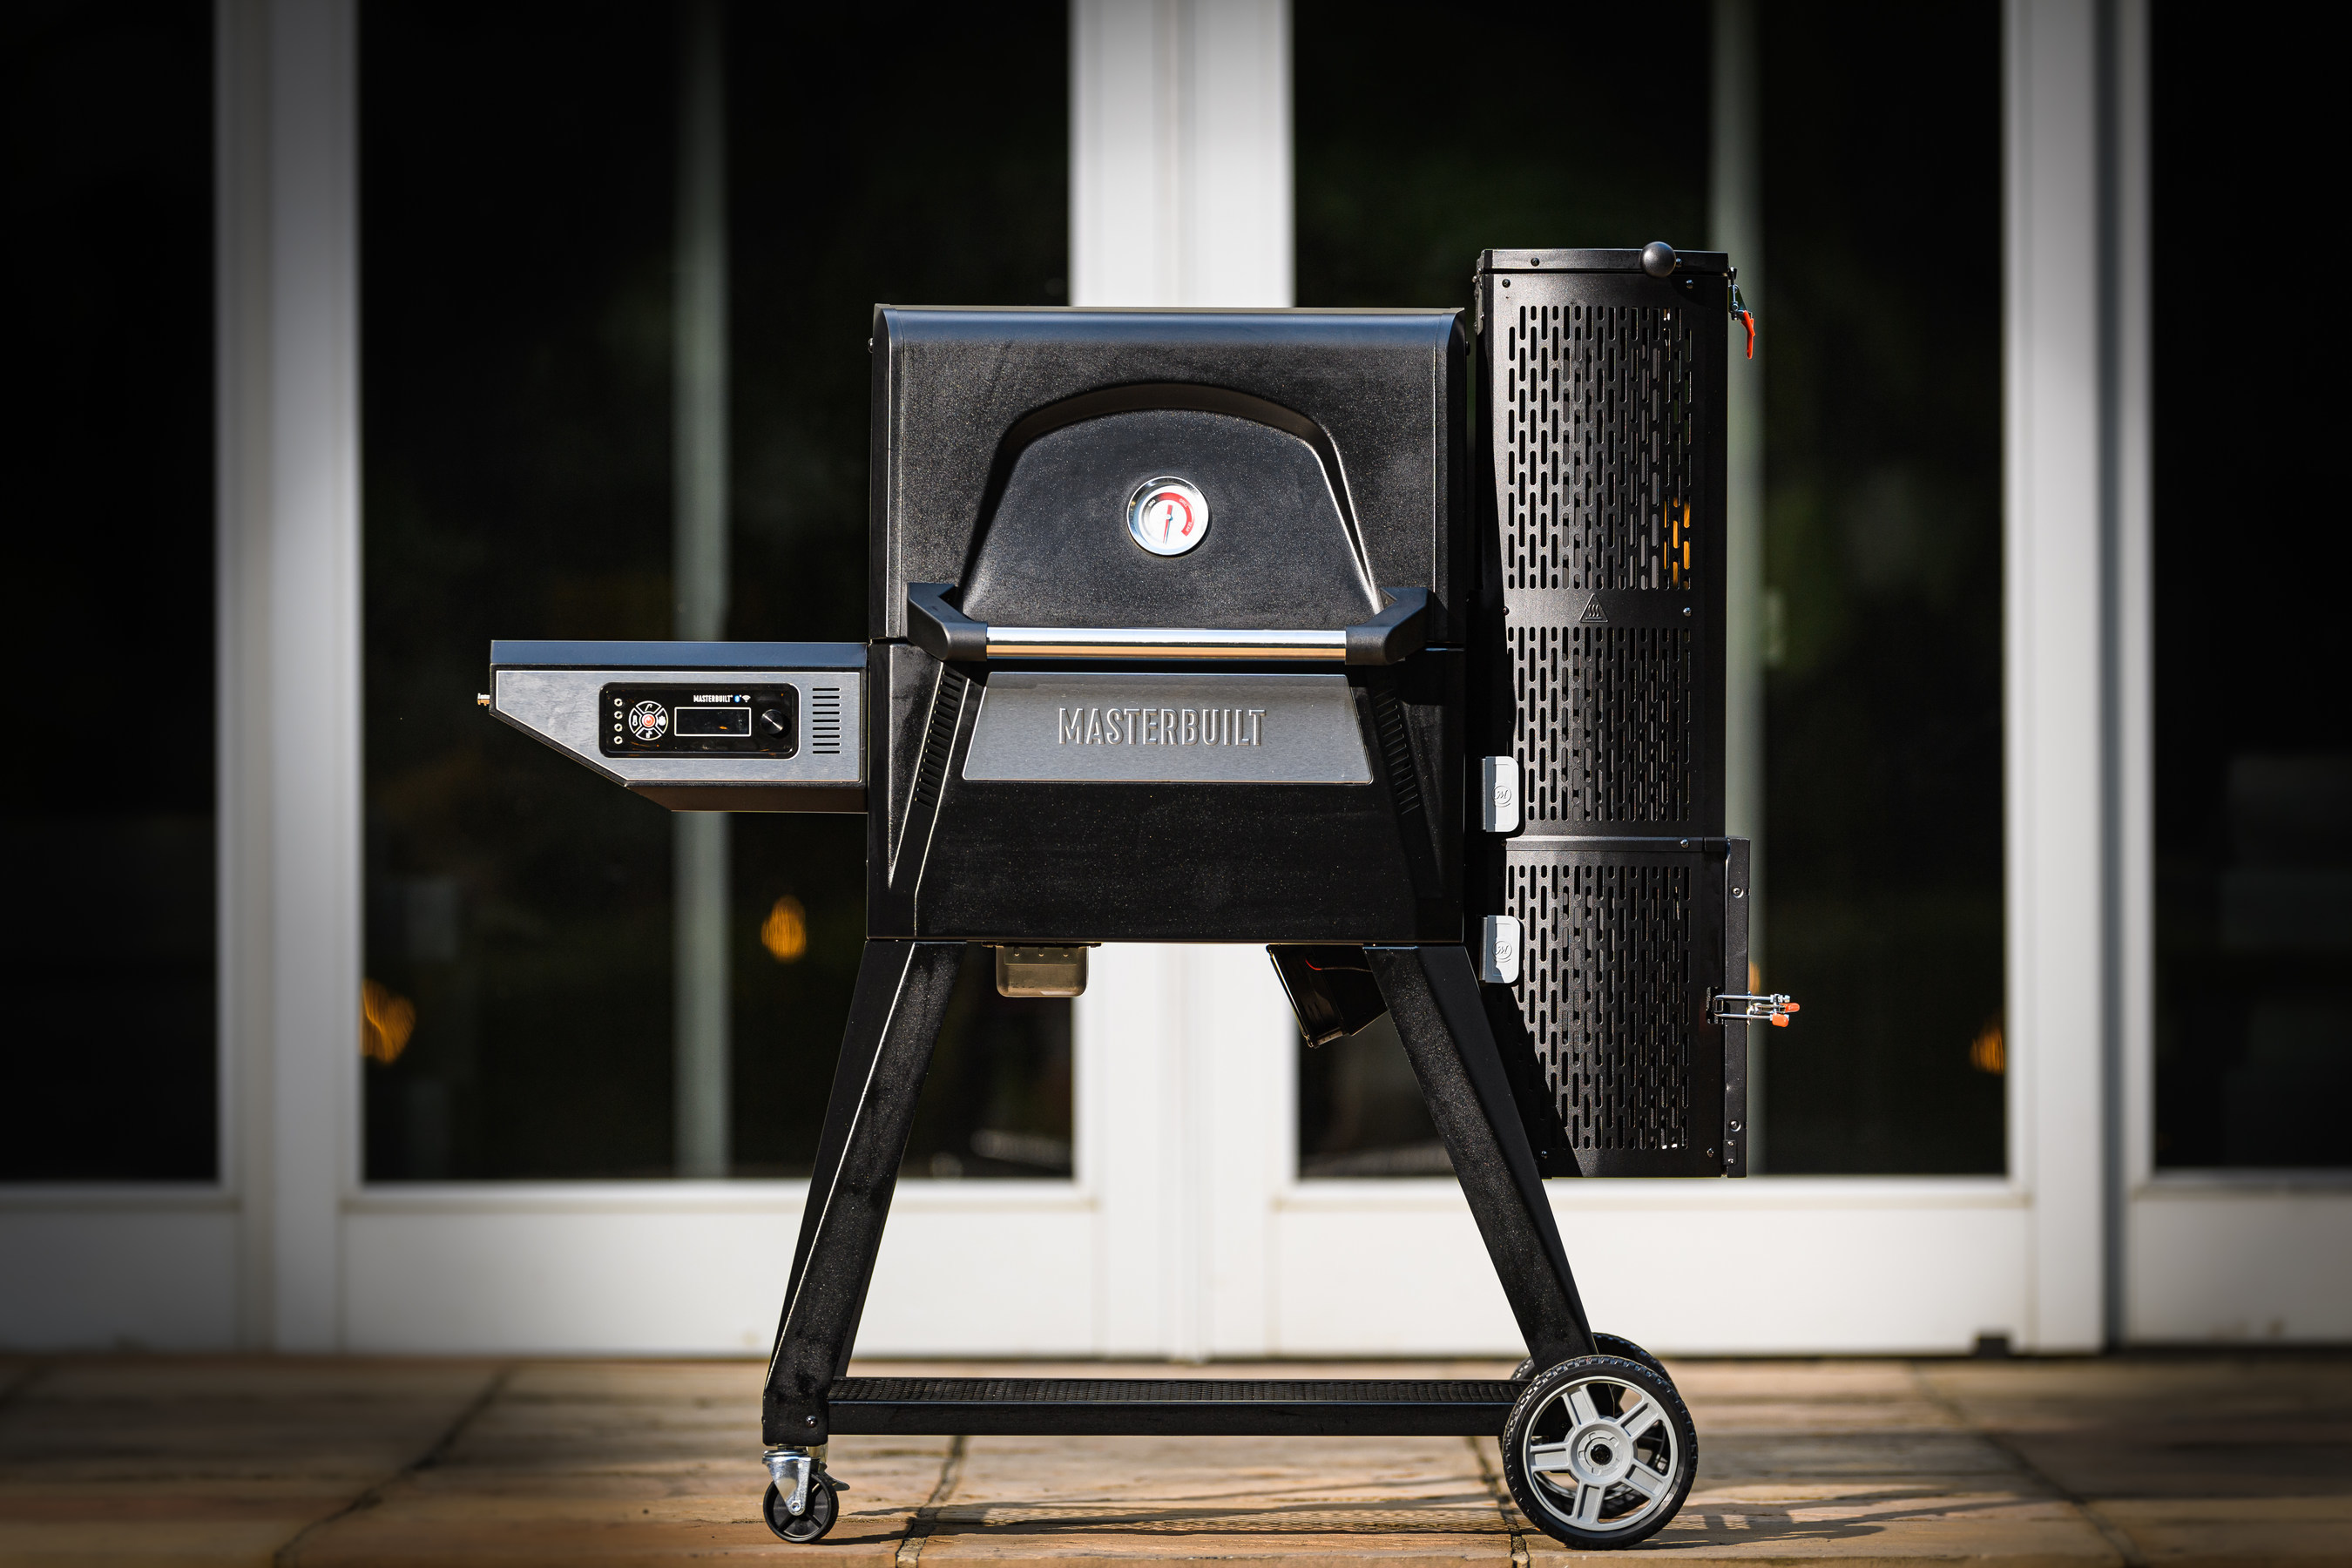 A Few Things To Consider While Buying A Grilling Machine